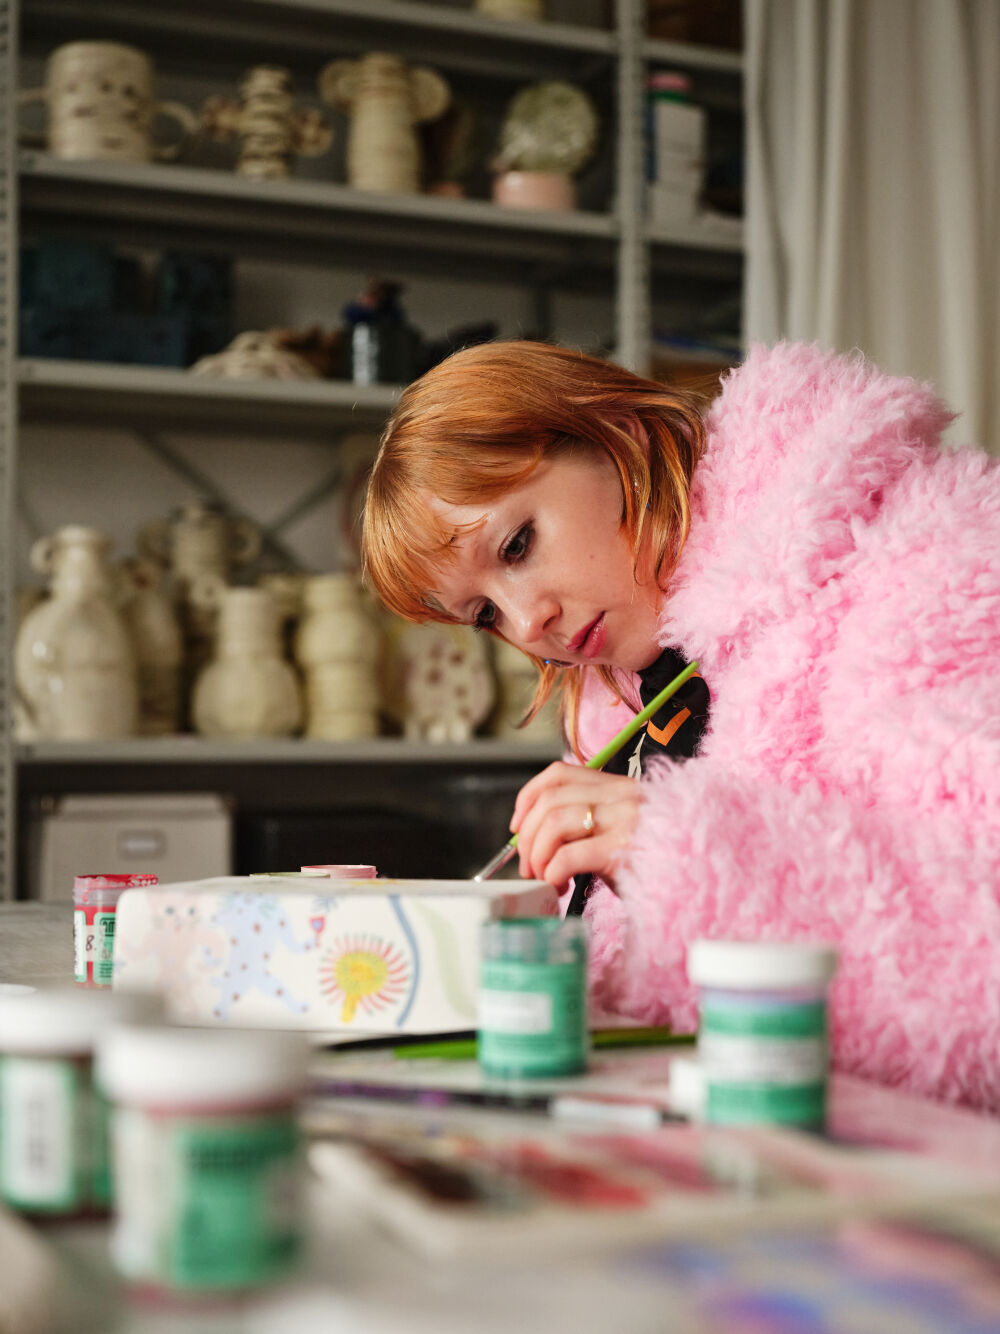 Yoyo Nasty in her artist studio painting a branded lunch box for the tech company Dreams